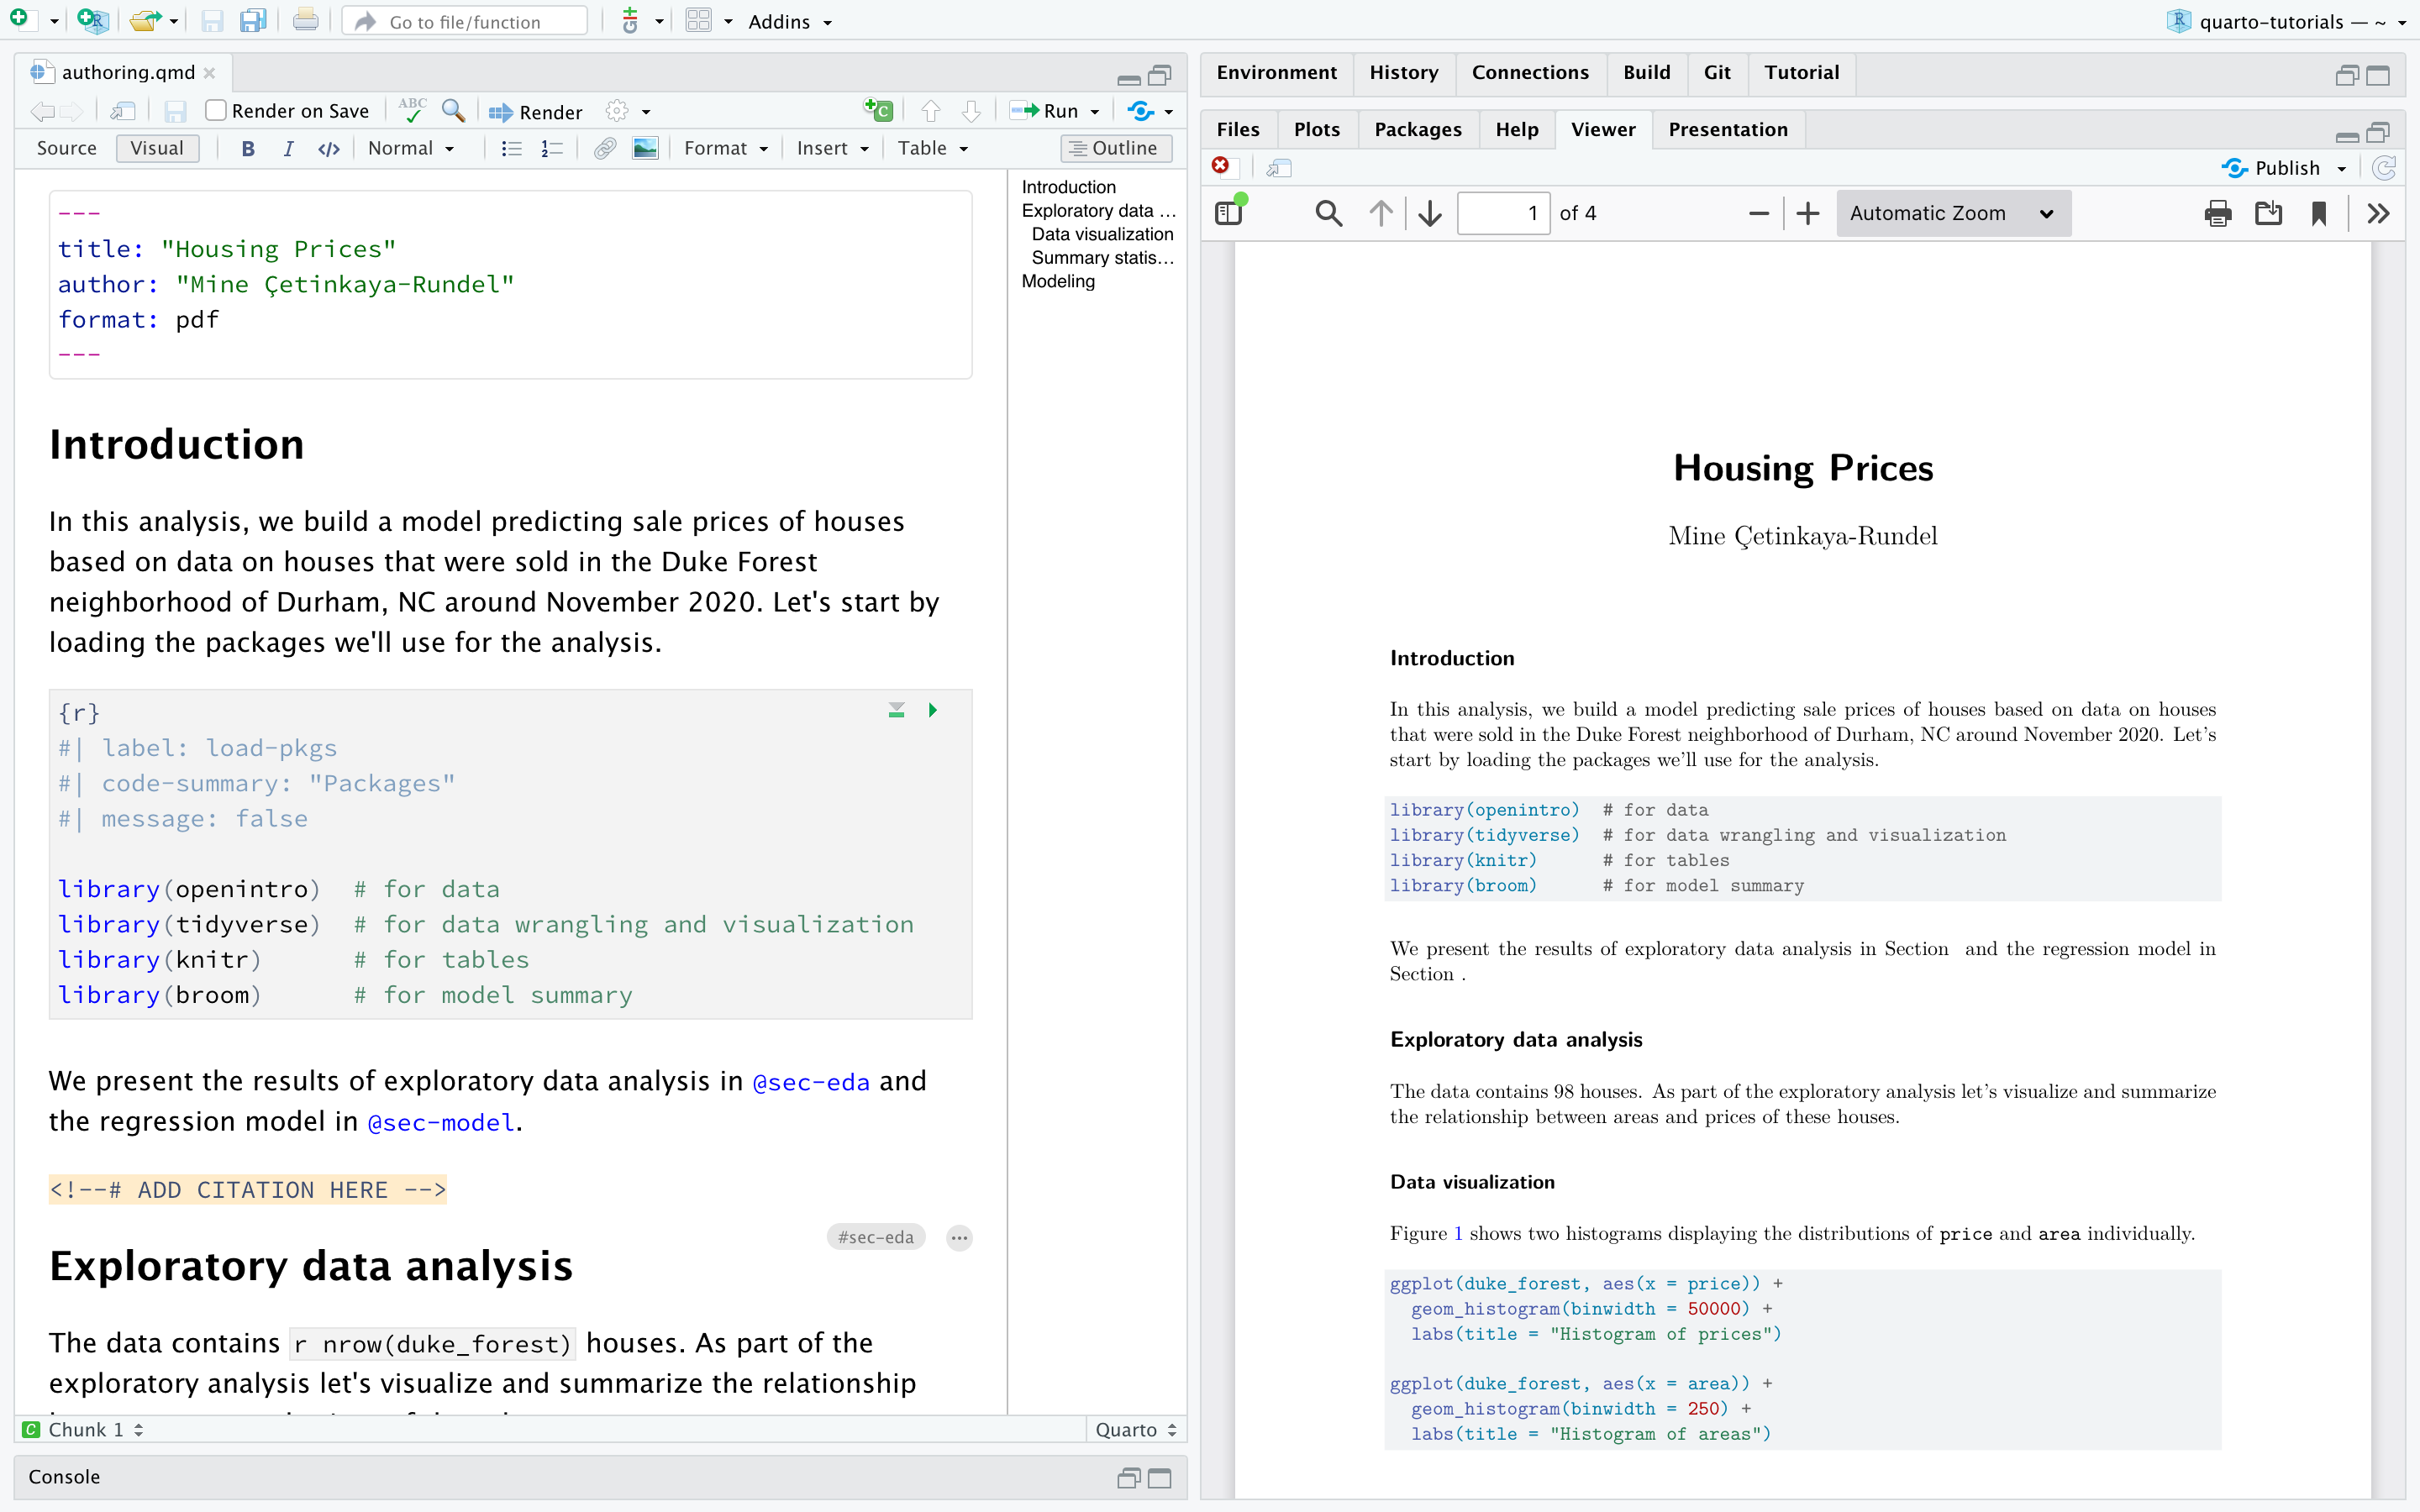 RStudio with authoring.qmd open. On the left: Source code in the visual editor. On the left: Rendered document as a PDF in the Viewer.